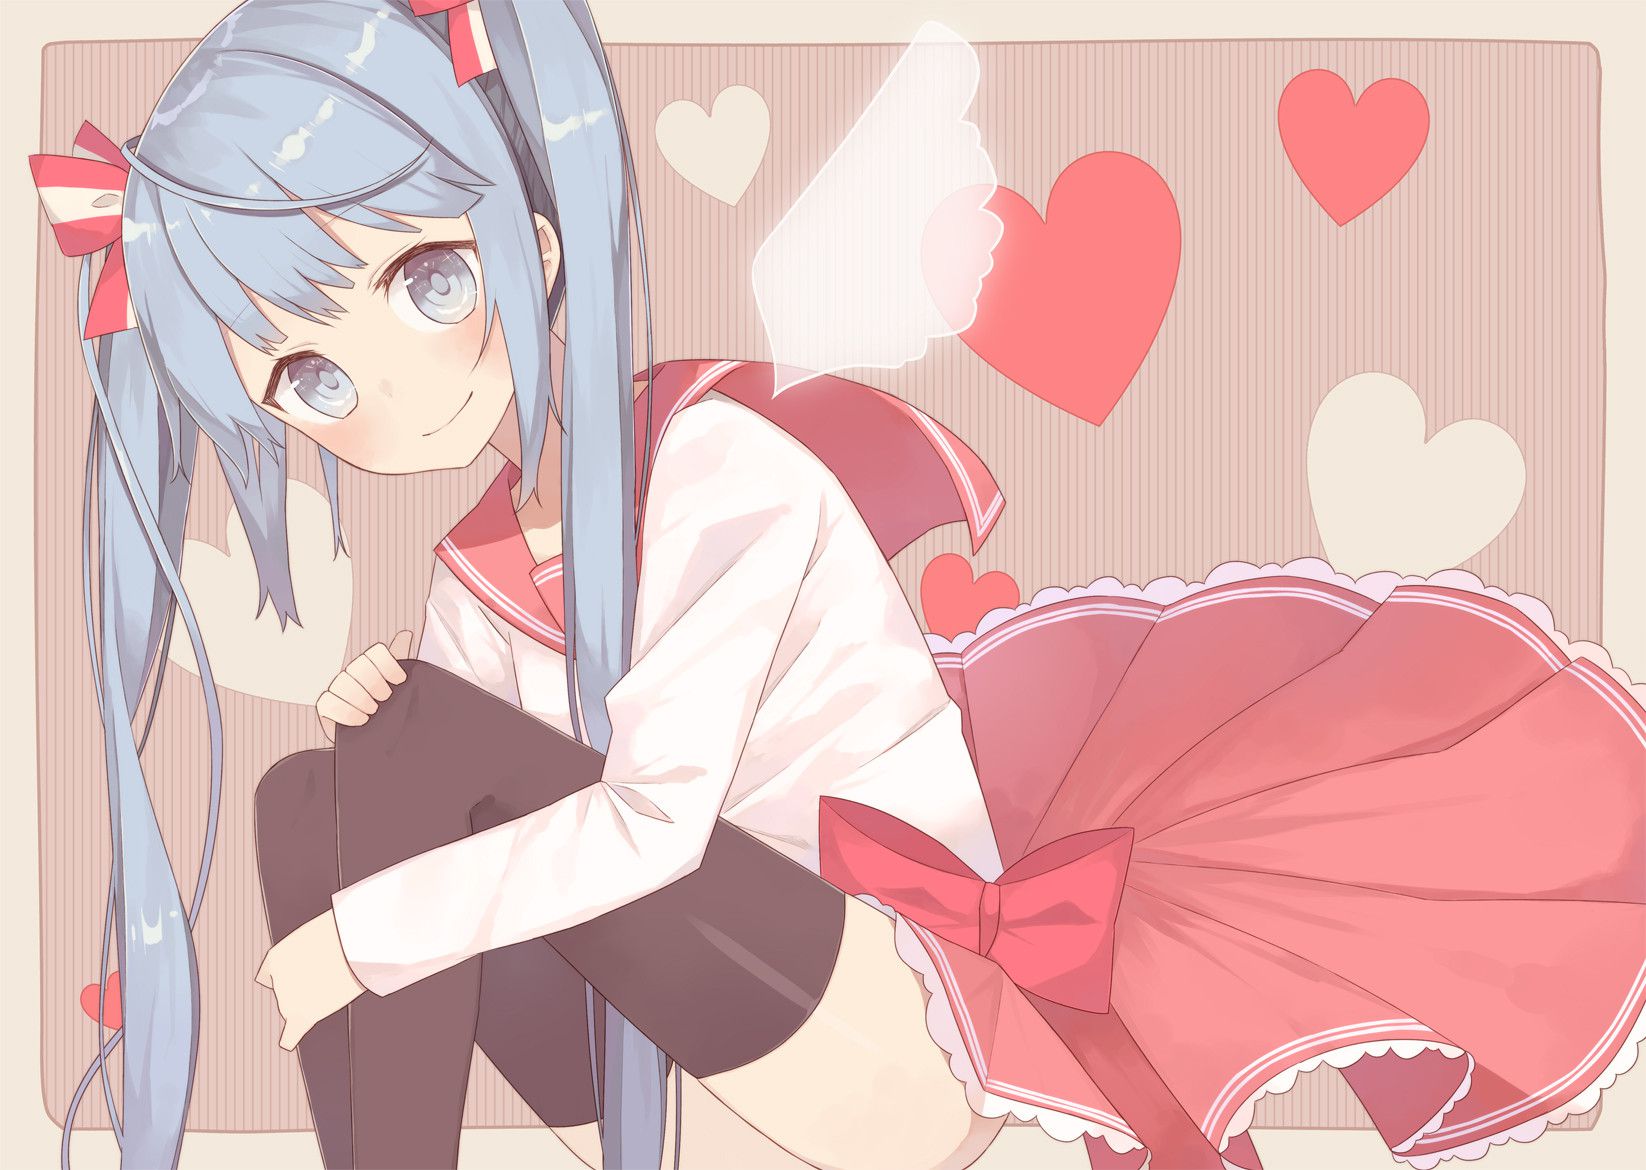 [Secondary] [VOCALOID] want to see images of miku dressed in school uniform! 3 18